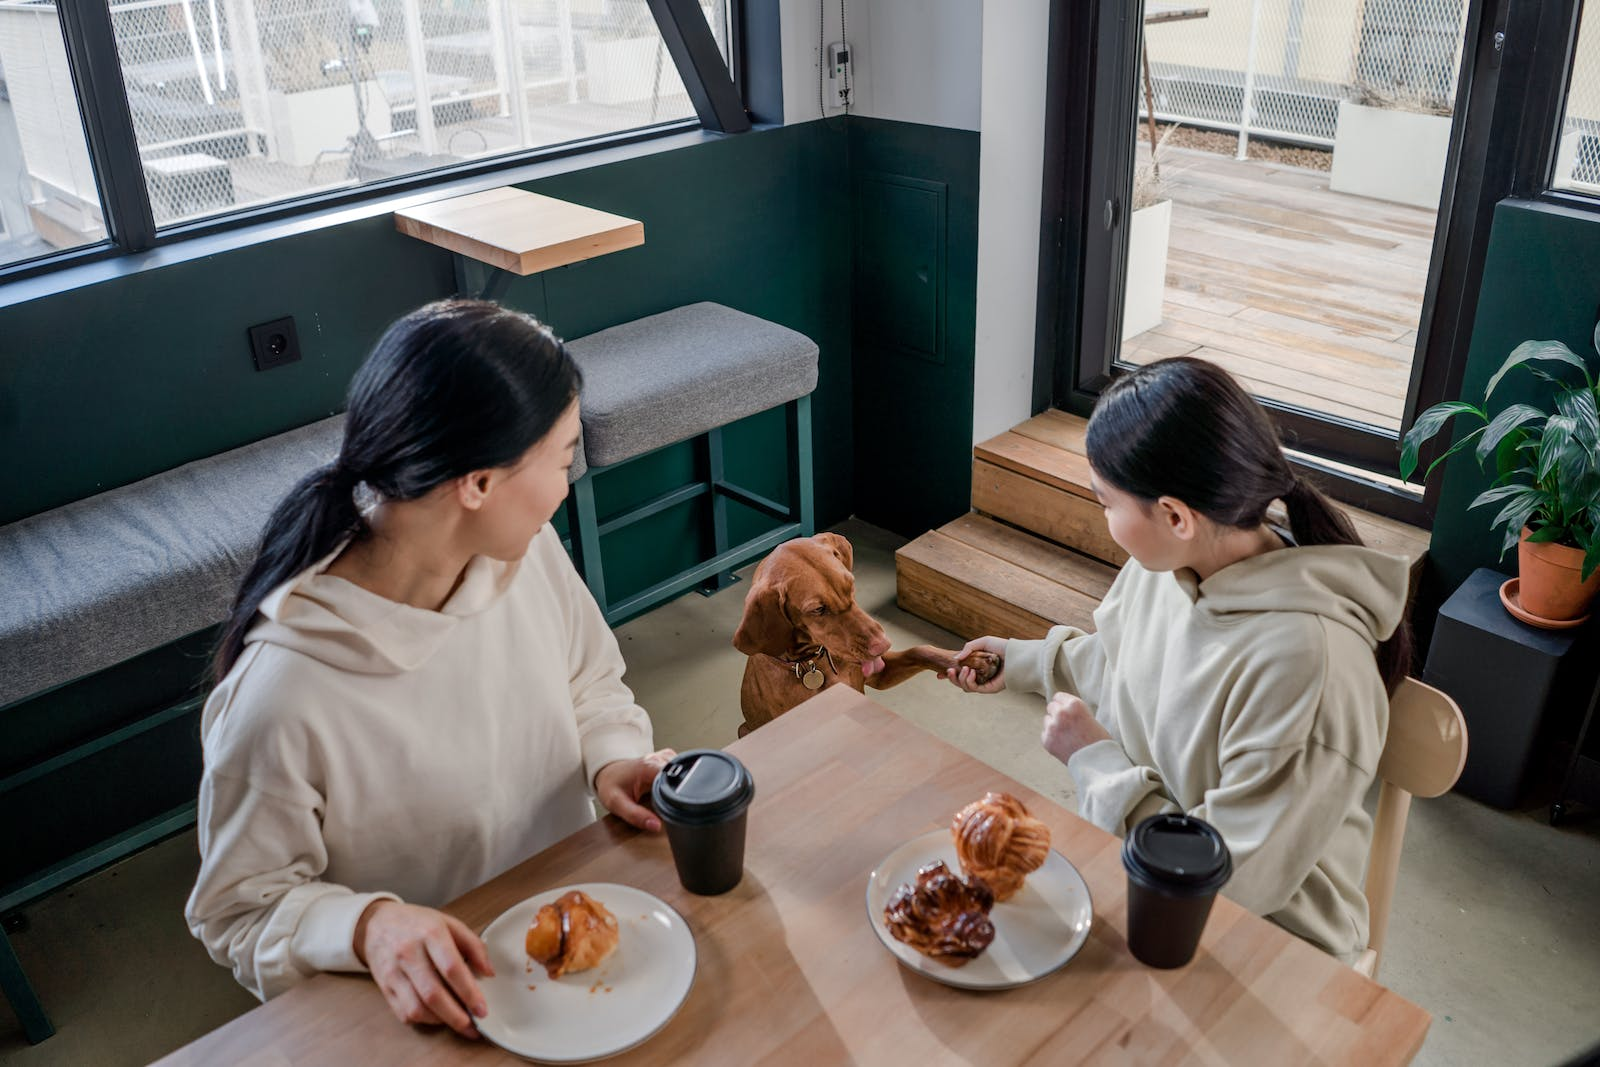 2 women eating at a table with a dog